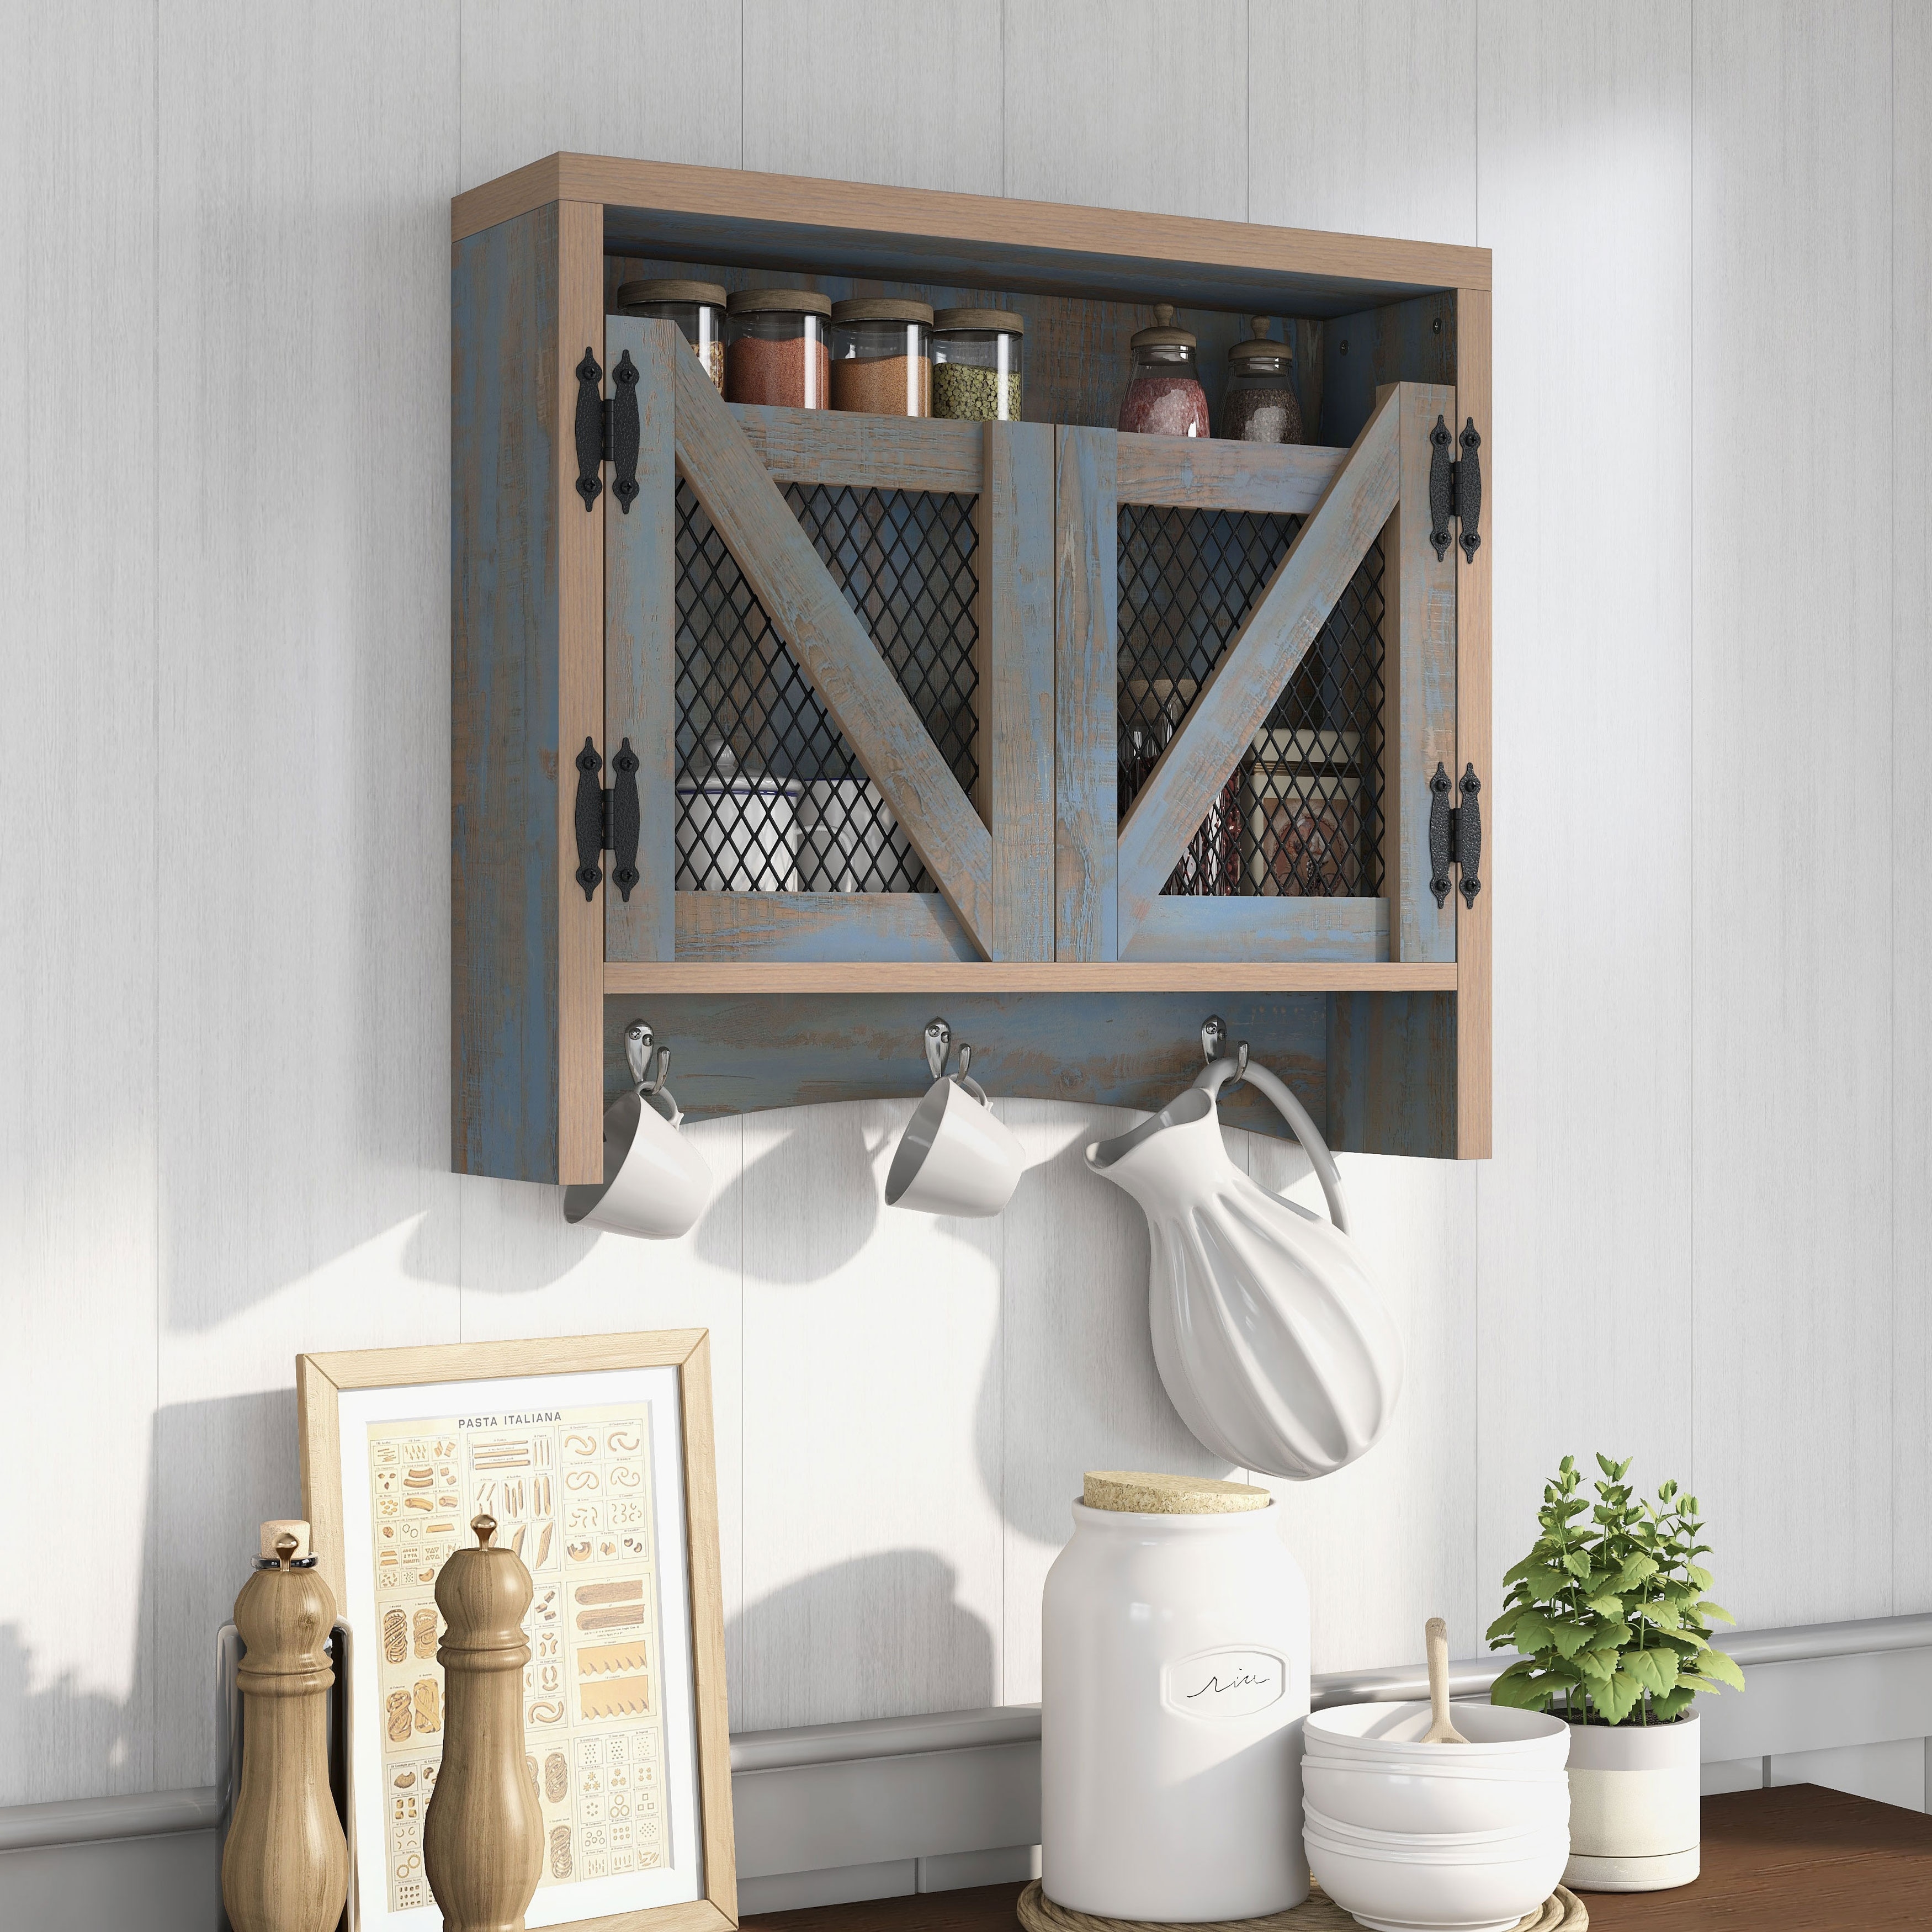 Denhour DH Basic Farmhouse Blue Entryway Wall Organizer with Hooks by, Size: Distressed Blue